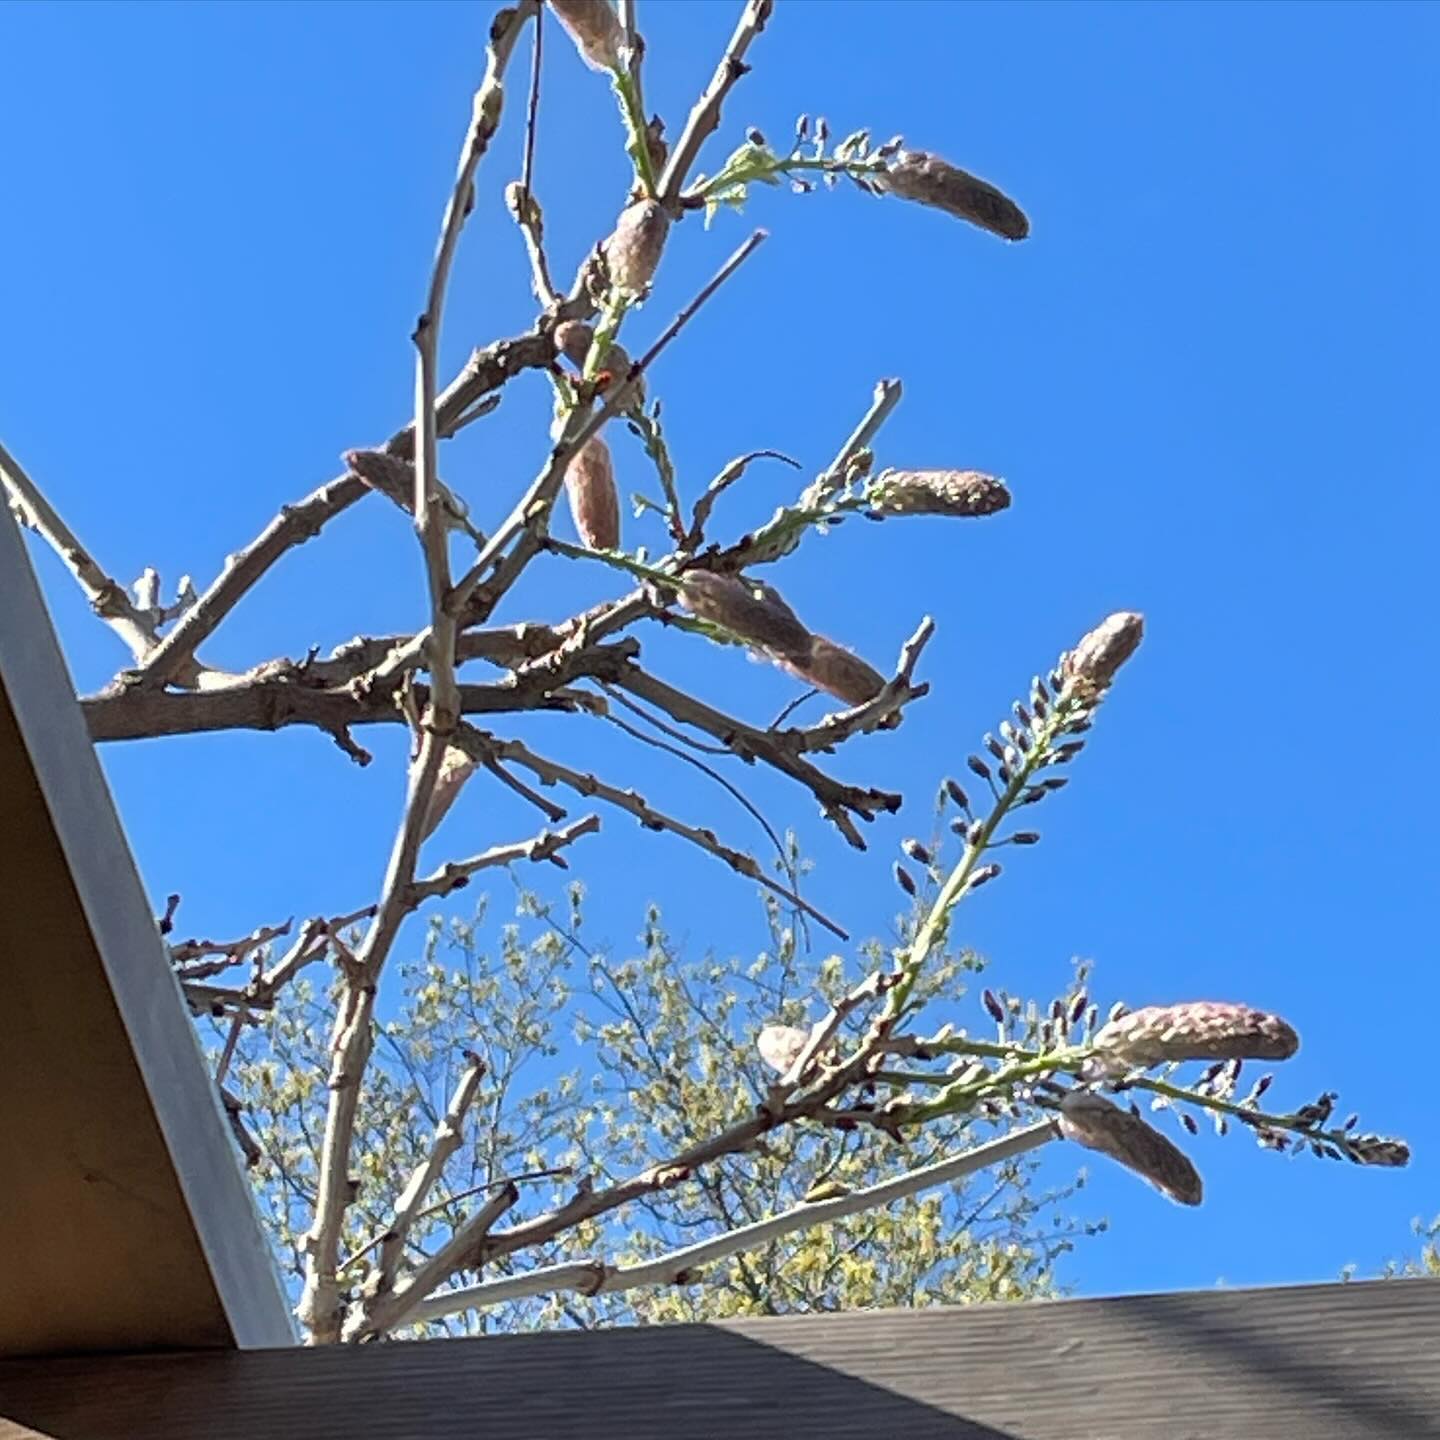 Tree branches with buds against a clear blue sky.